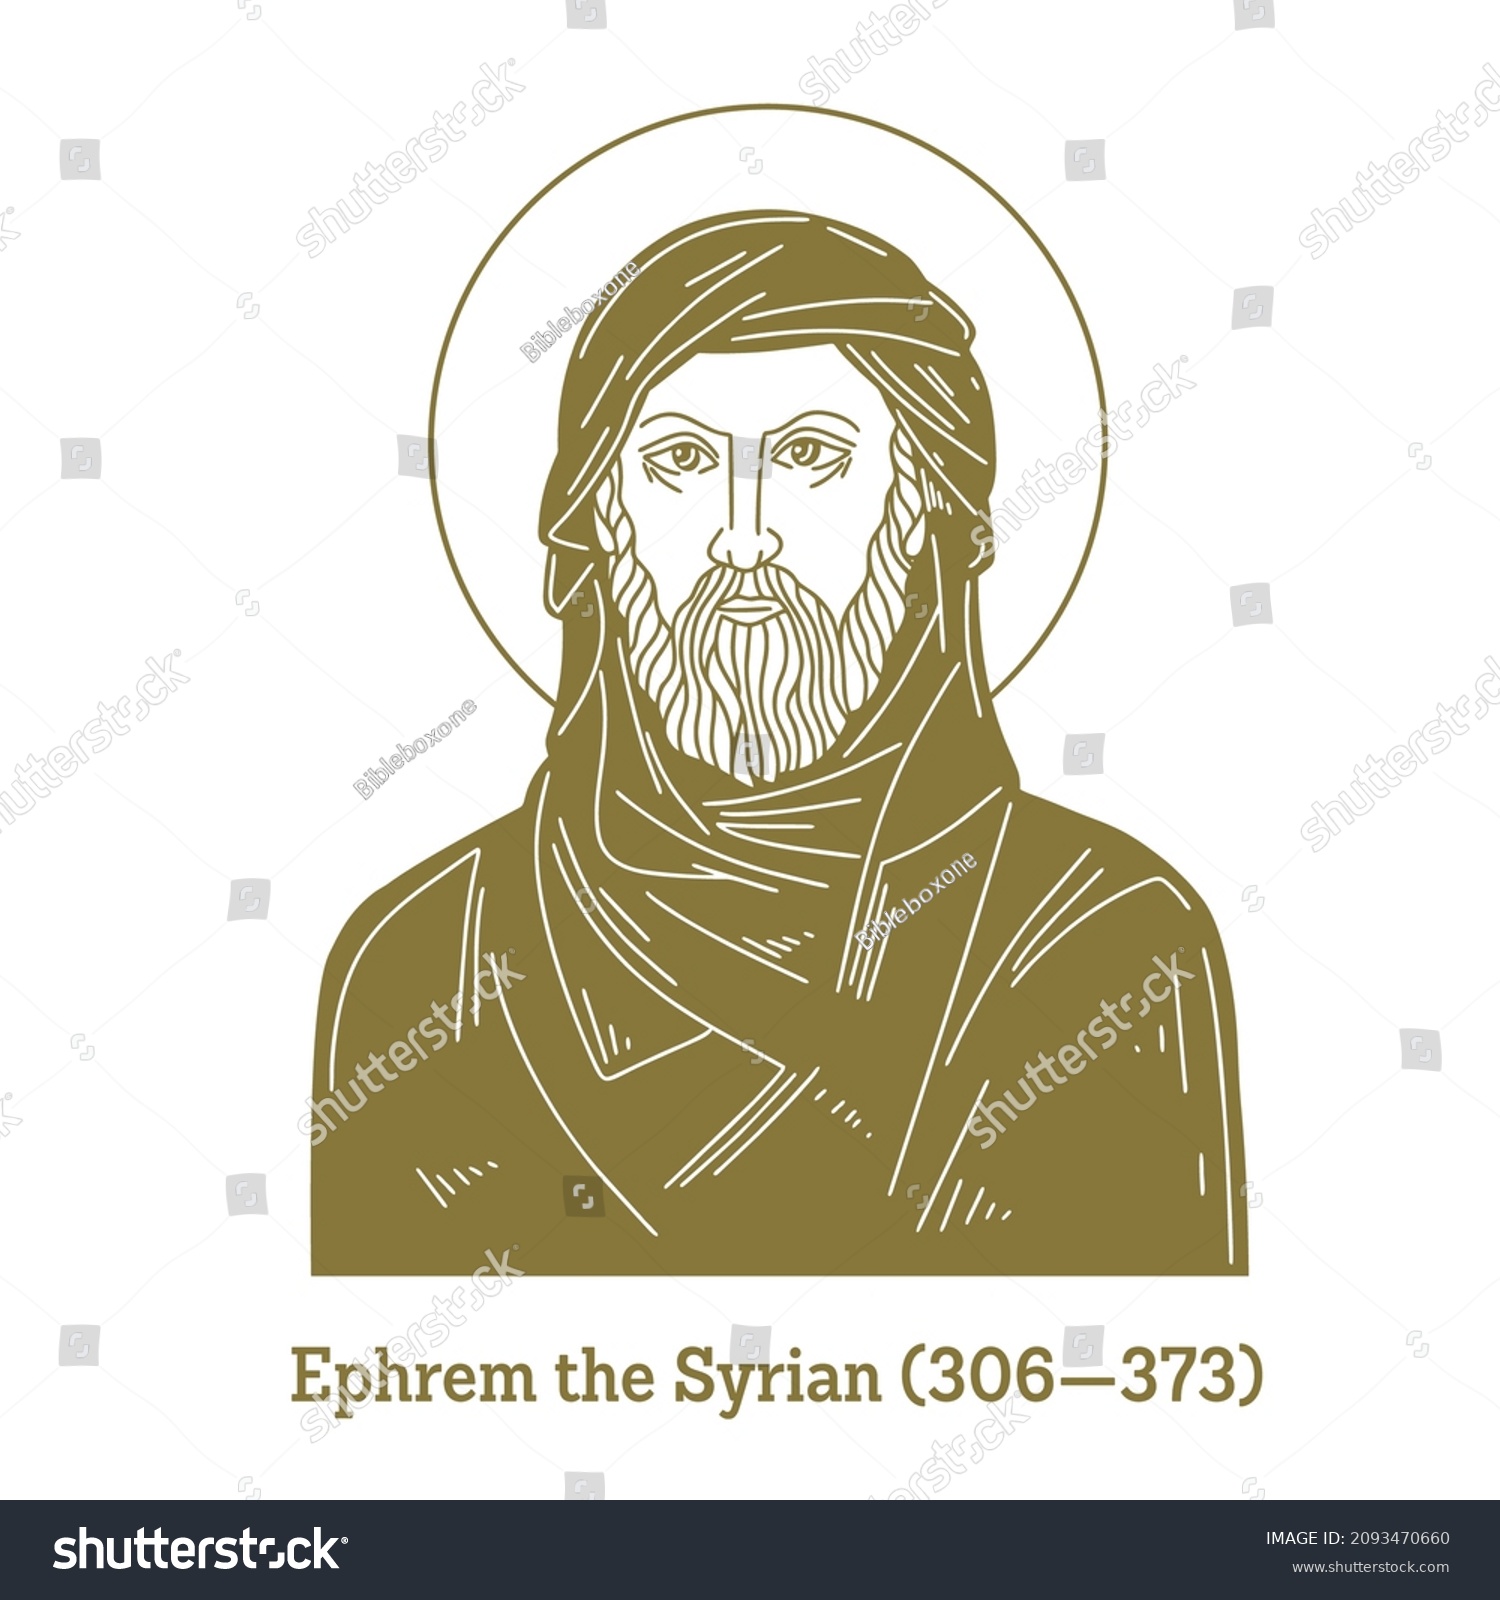 SVG of Ephrem the Syrian (306-373) was a prominent Christian theologian and writer, who is revered as one of the most notable hymnographers of Eastern Christianity. svg